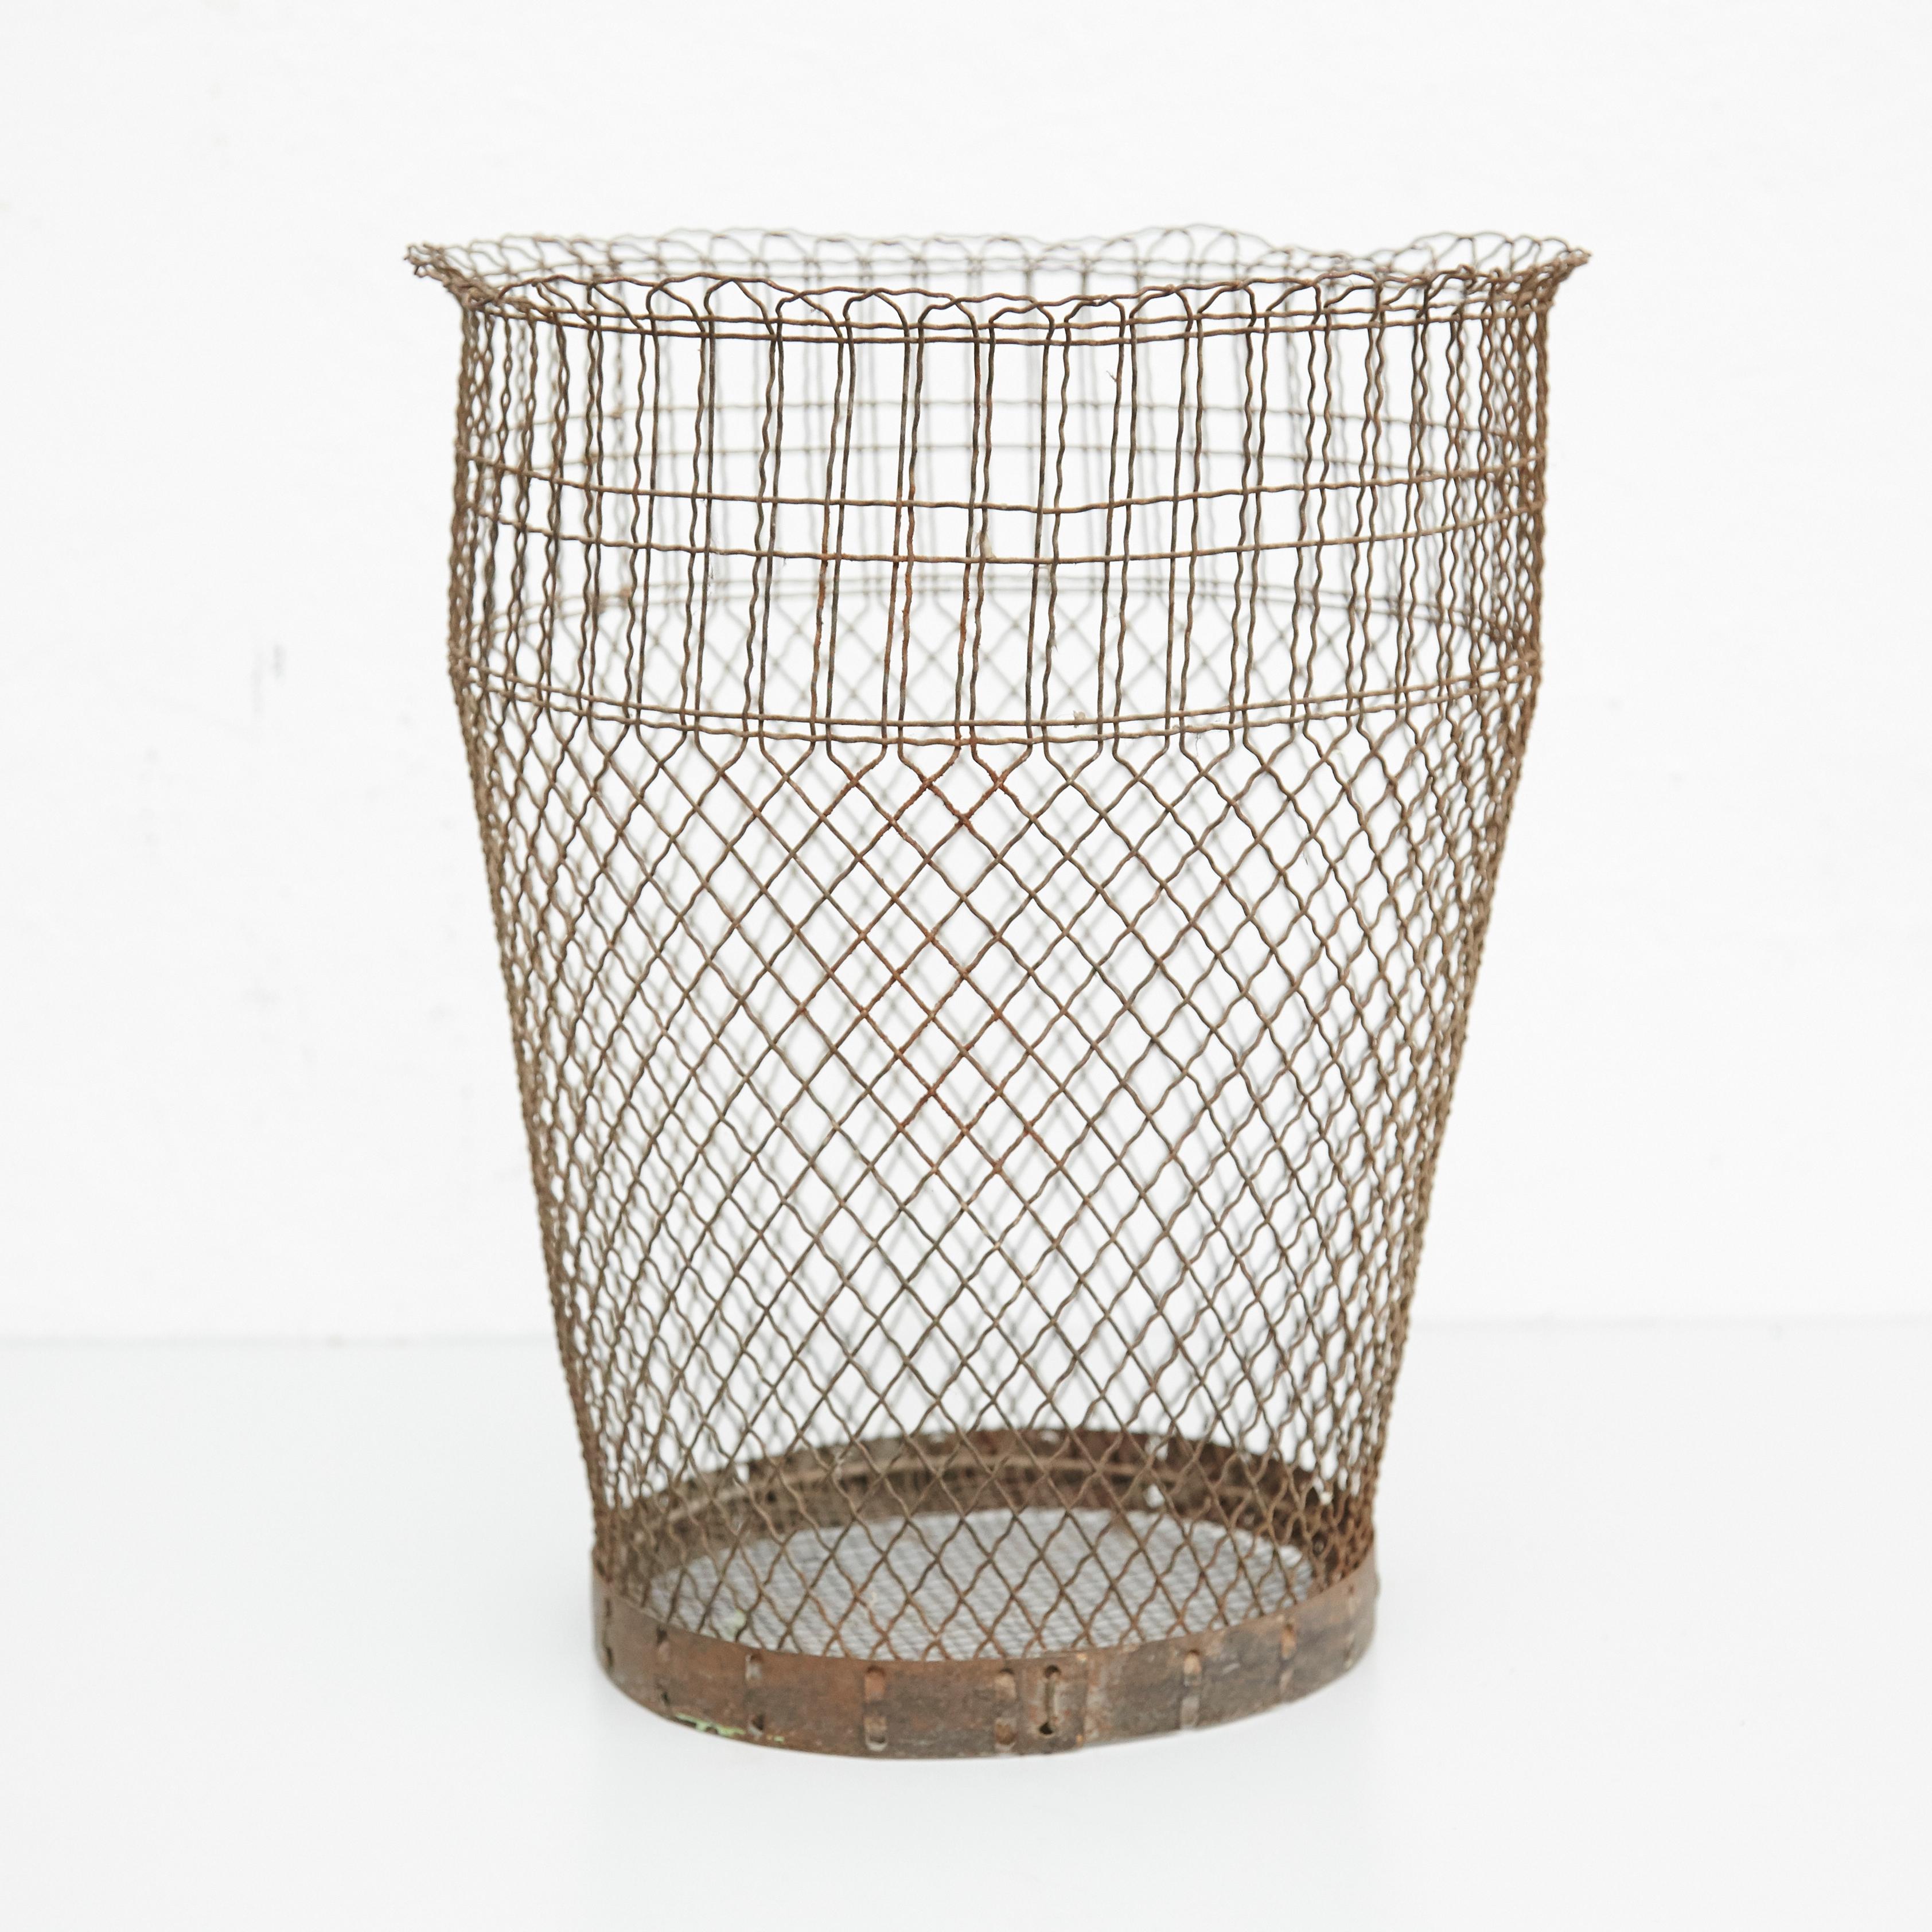 Metal paper bin made by wire woven in a classic cross-hatched pattern completed by a solid ring. 
Unknown manufacturer, France,
circa 1940

Materials:
Metal

Dimensions: 
Diameter 33 x 35 height cm

In original condition, with minor wear